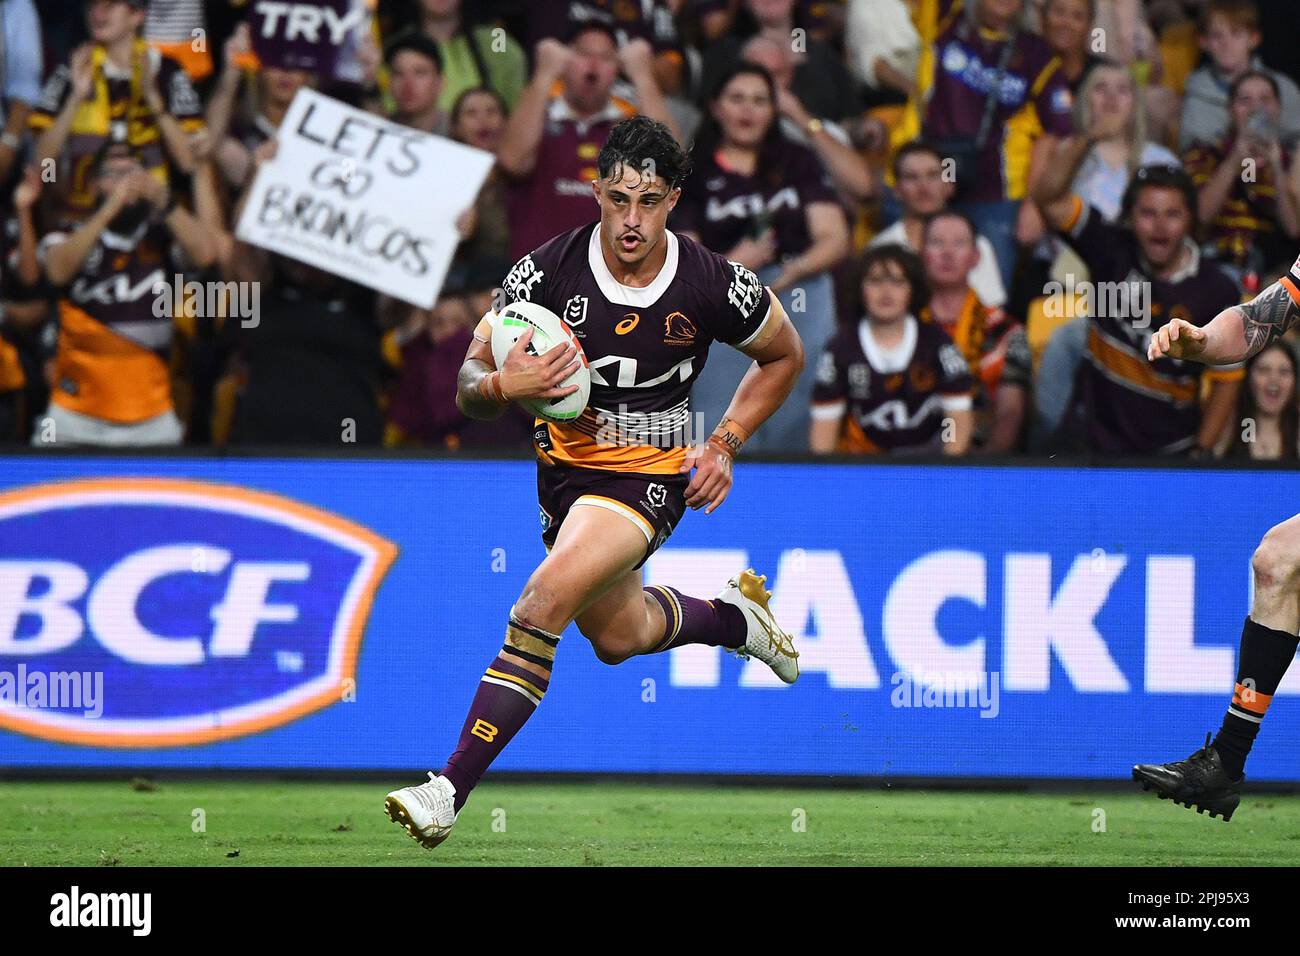 https://c8.alamy.com/comp/2PJ95X3/kotoni-staggs-of-the-broncos-scores-a-try-during-the-nrl-round-5-match-between-the-brisbane-broncos-and-the-wests-tigers-at-suncorp-stadium-in-brisbane-saturday-april-1-2023-aap-imagejono-searle-no-archiving-editorial-use-only-strictly-editorial-use-only-no-commercial-use-no-books-2PJ95X3.jpg